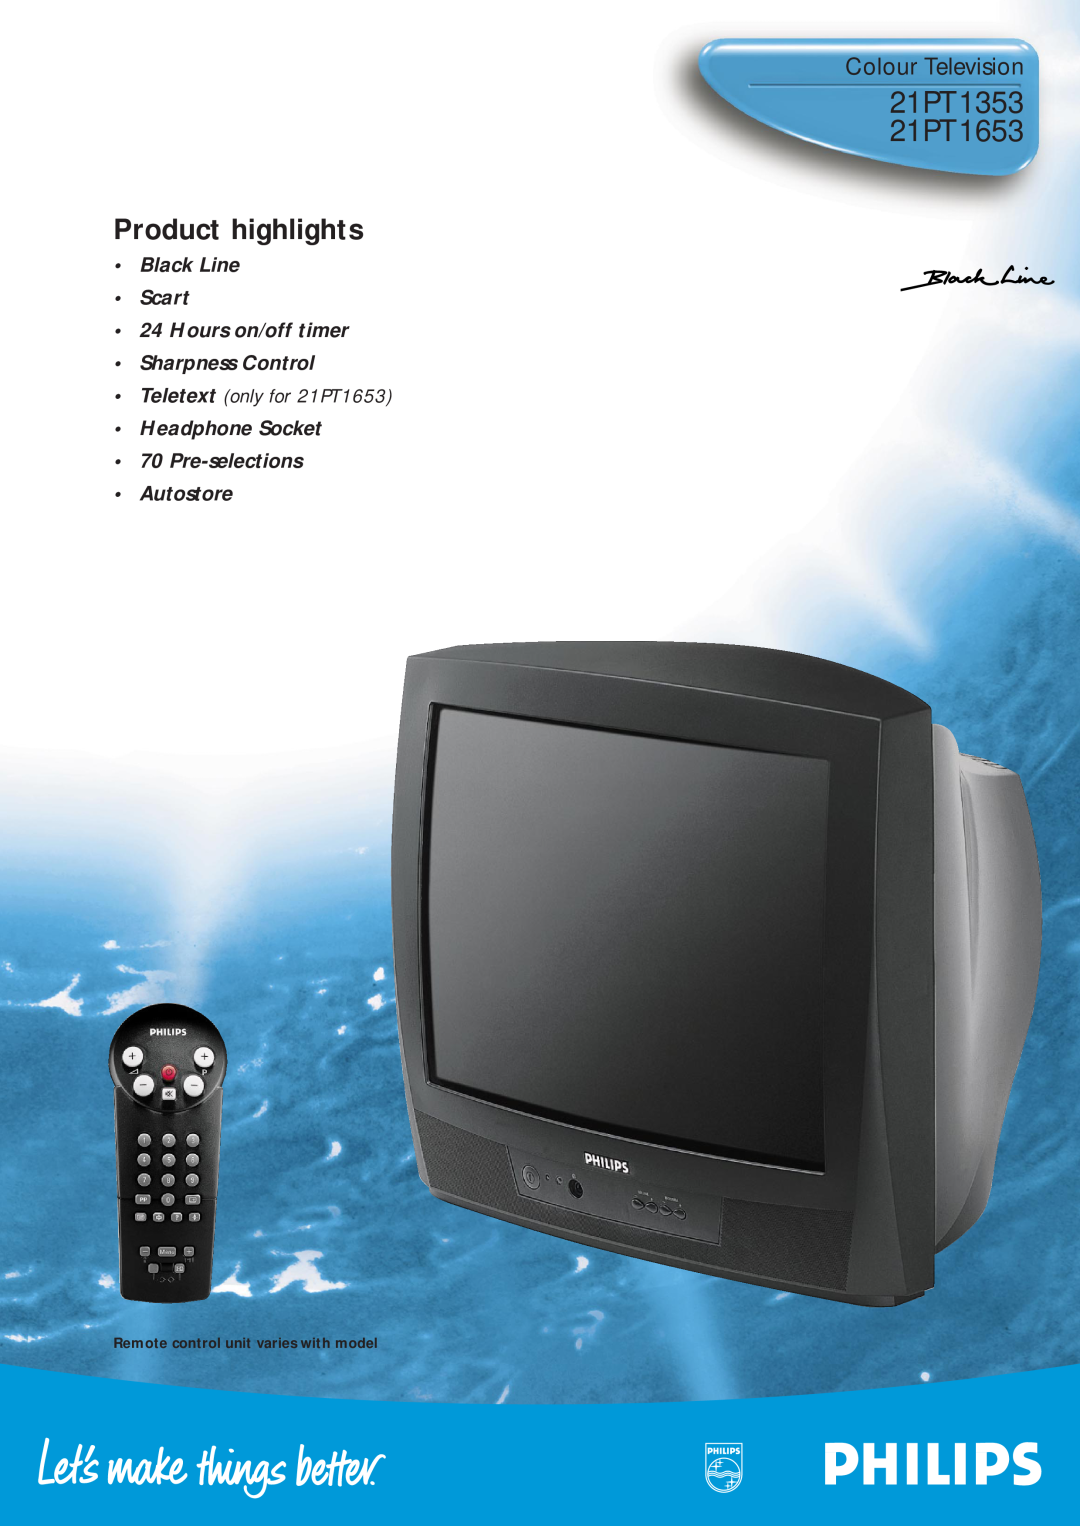 Philips manual 21PT1353 21PT1653, Product highlights, Colour Television, Teletext only for 21PT1653 